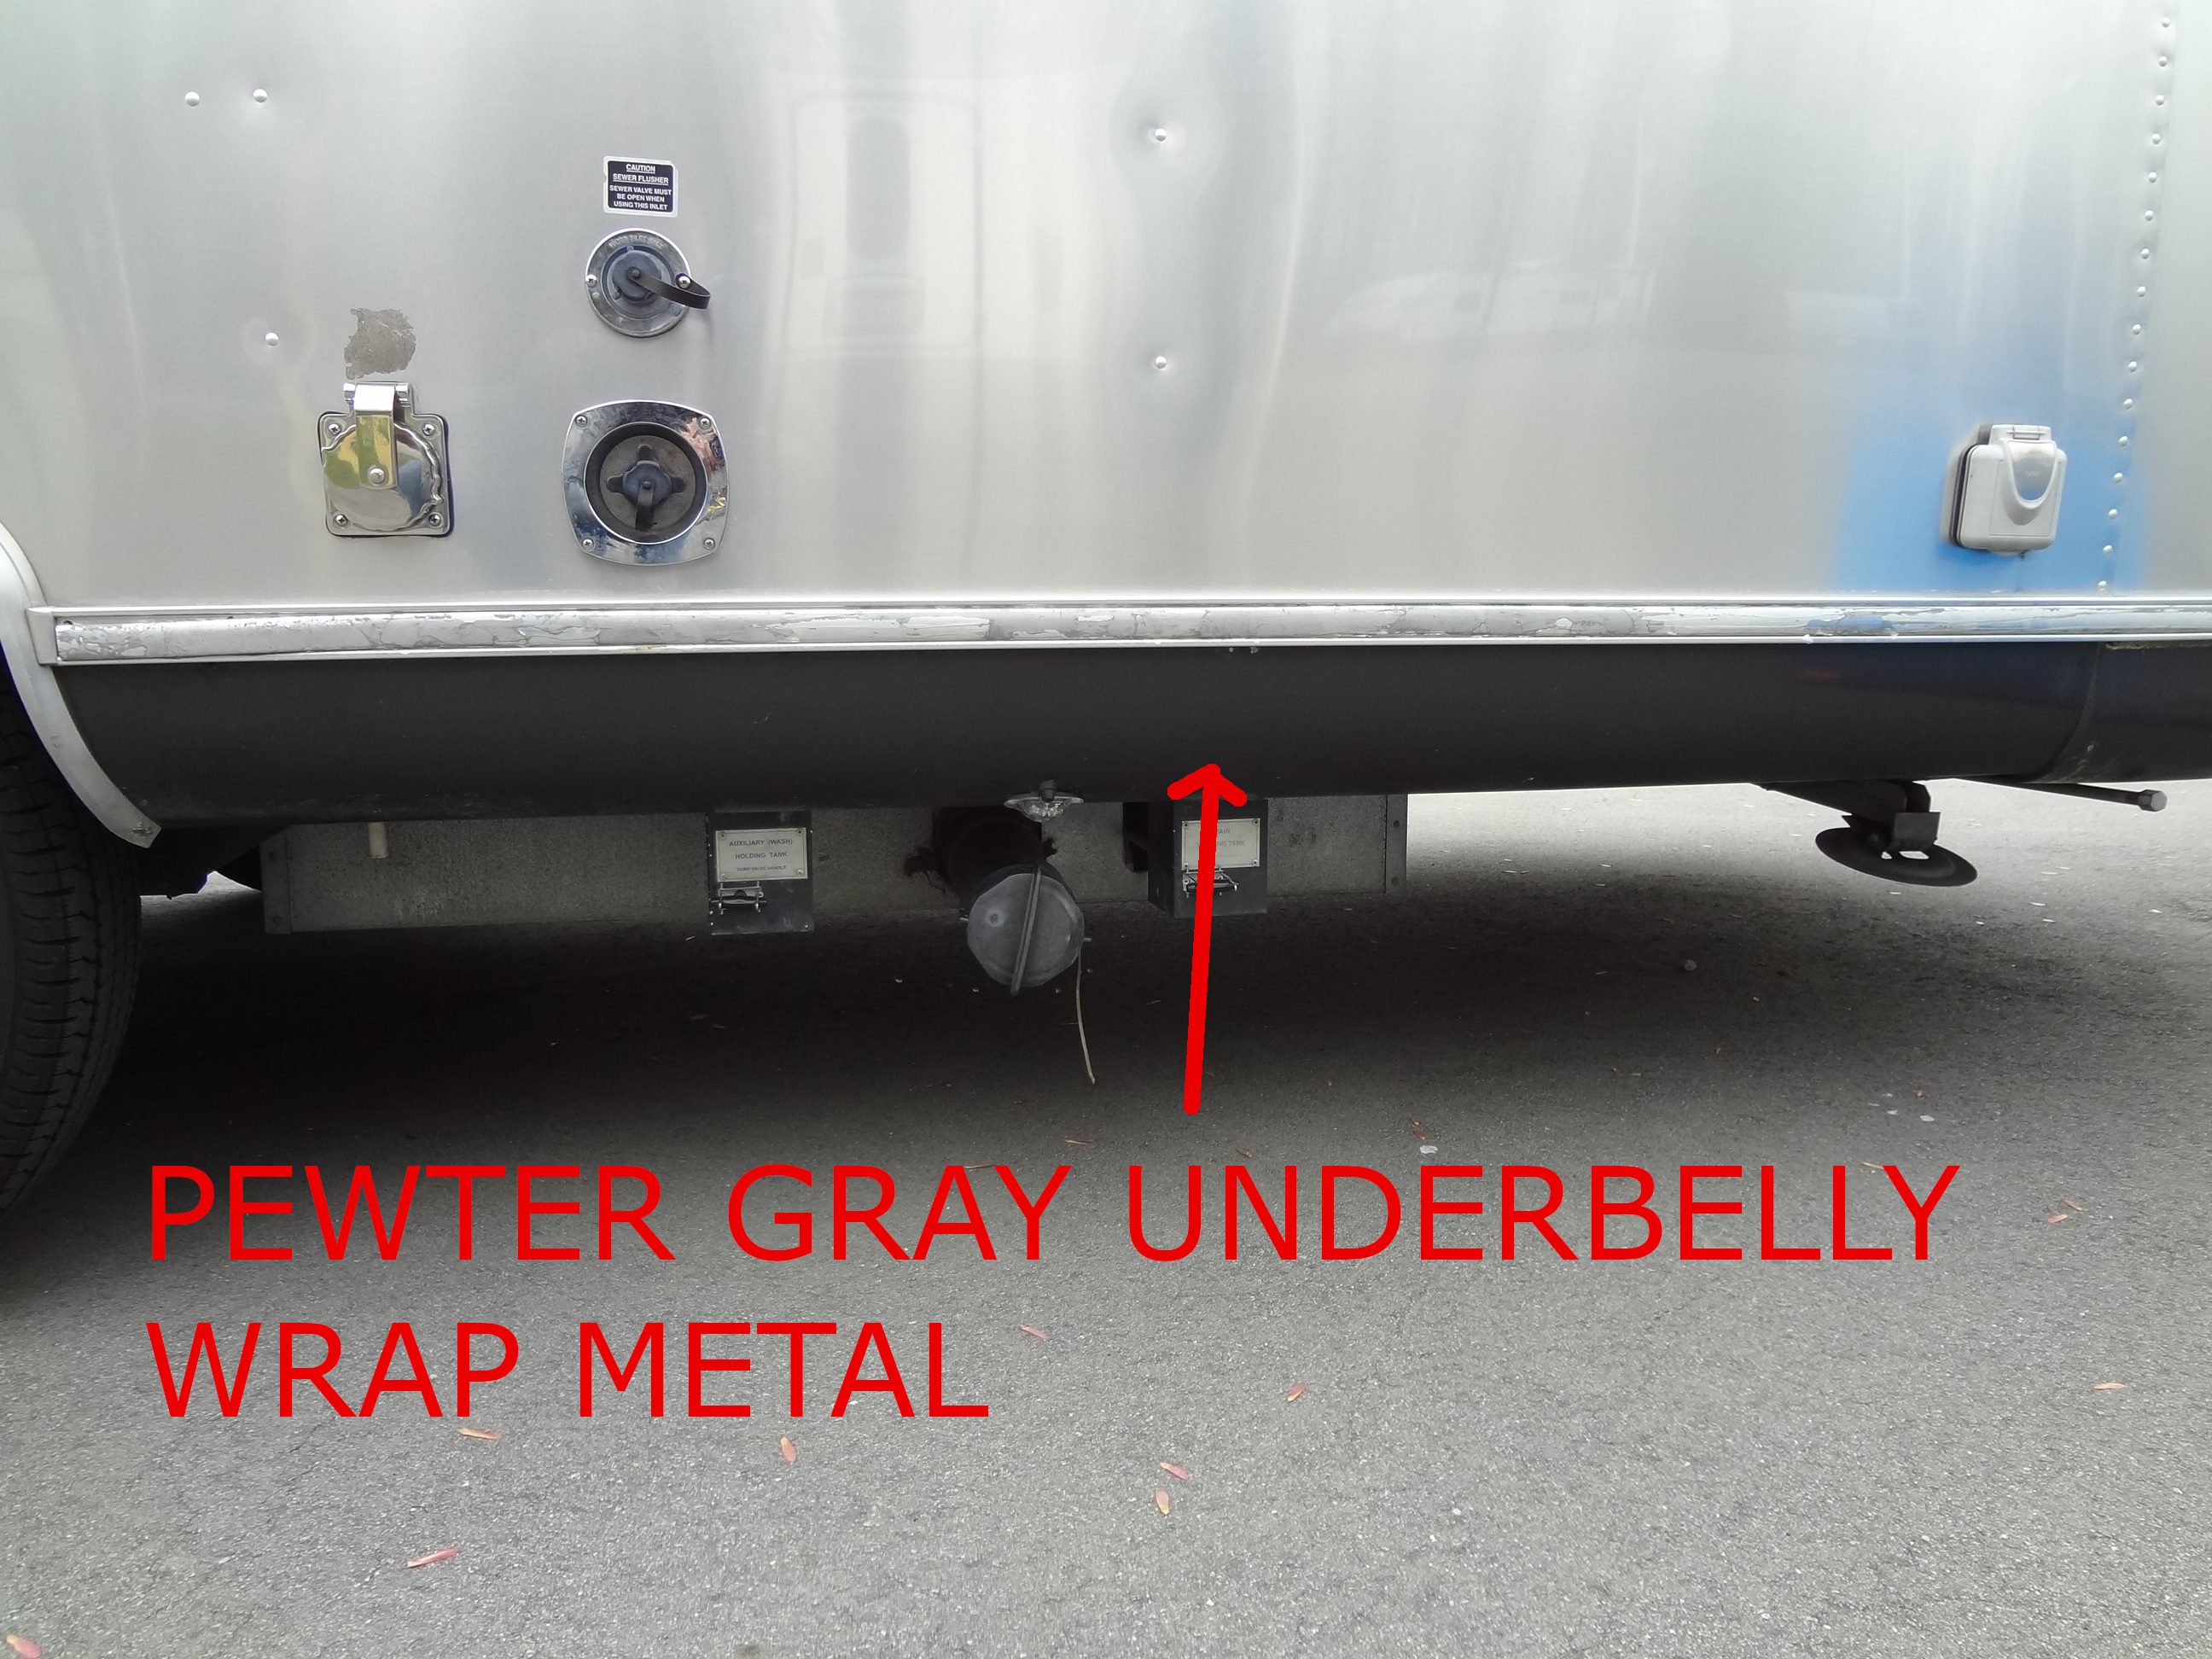 Airstream Pewter Gray Underbelly Wrap Metal 101131-01